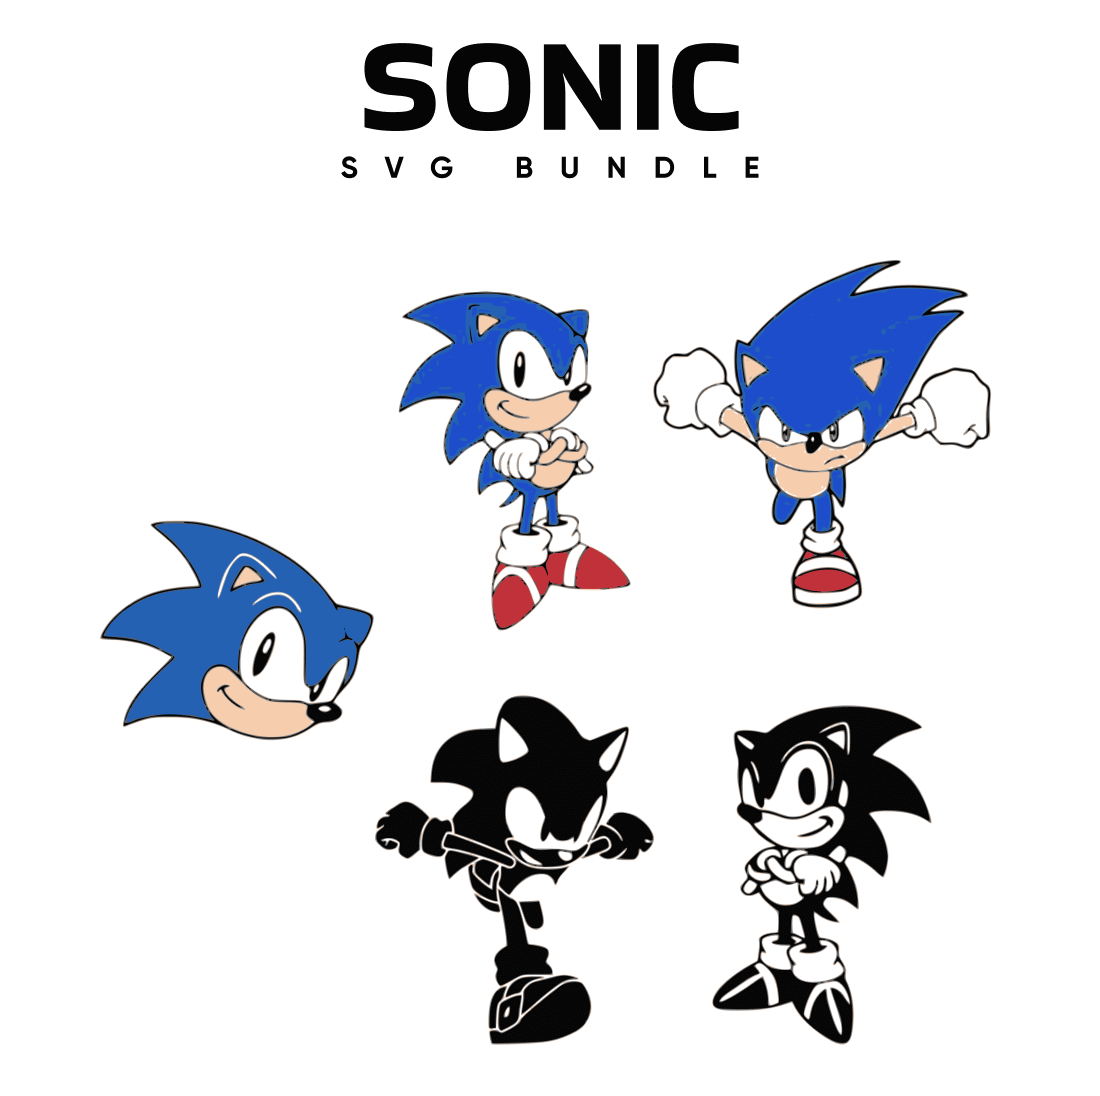 Only the face of Sonic and the entire silhouette is depicted on a white background.